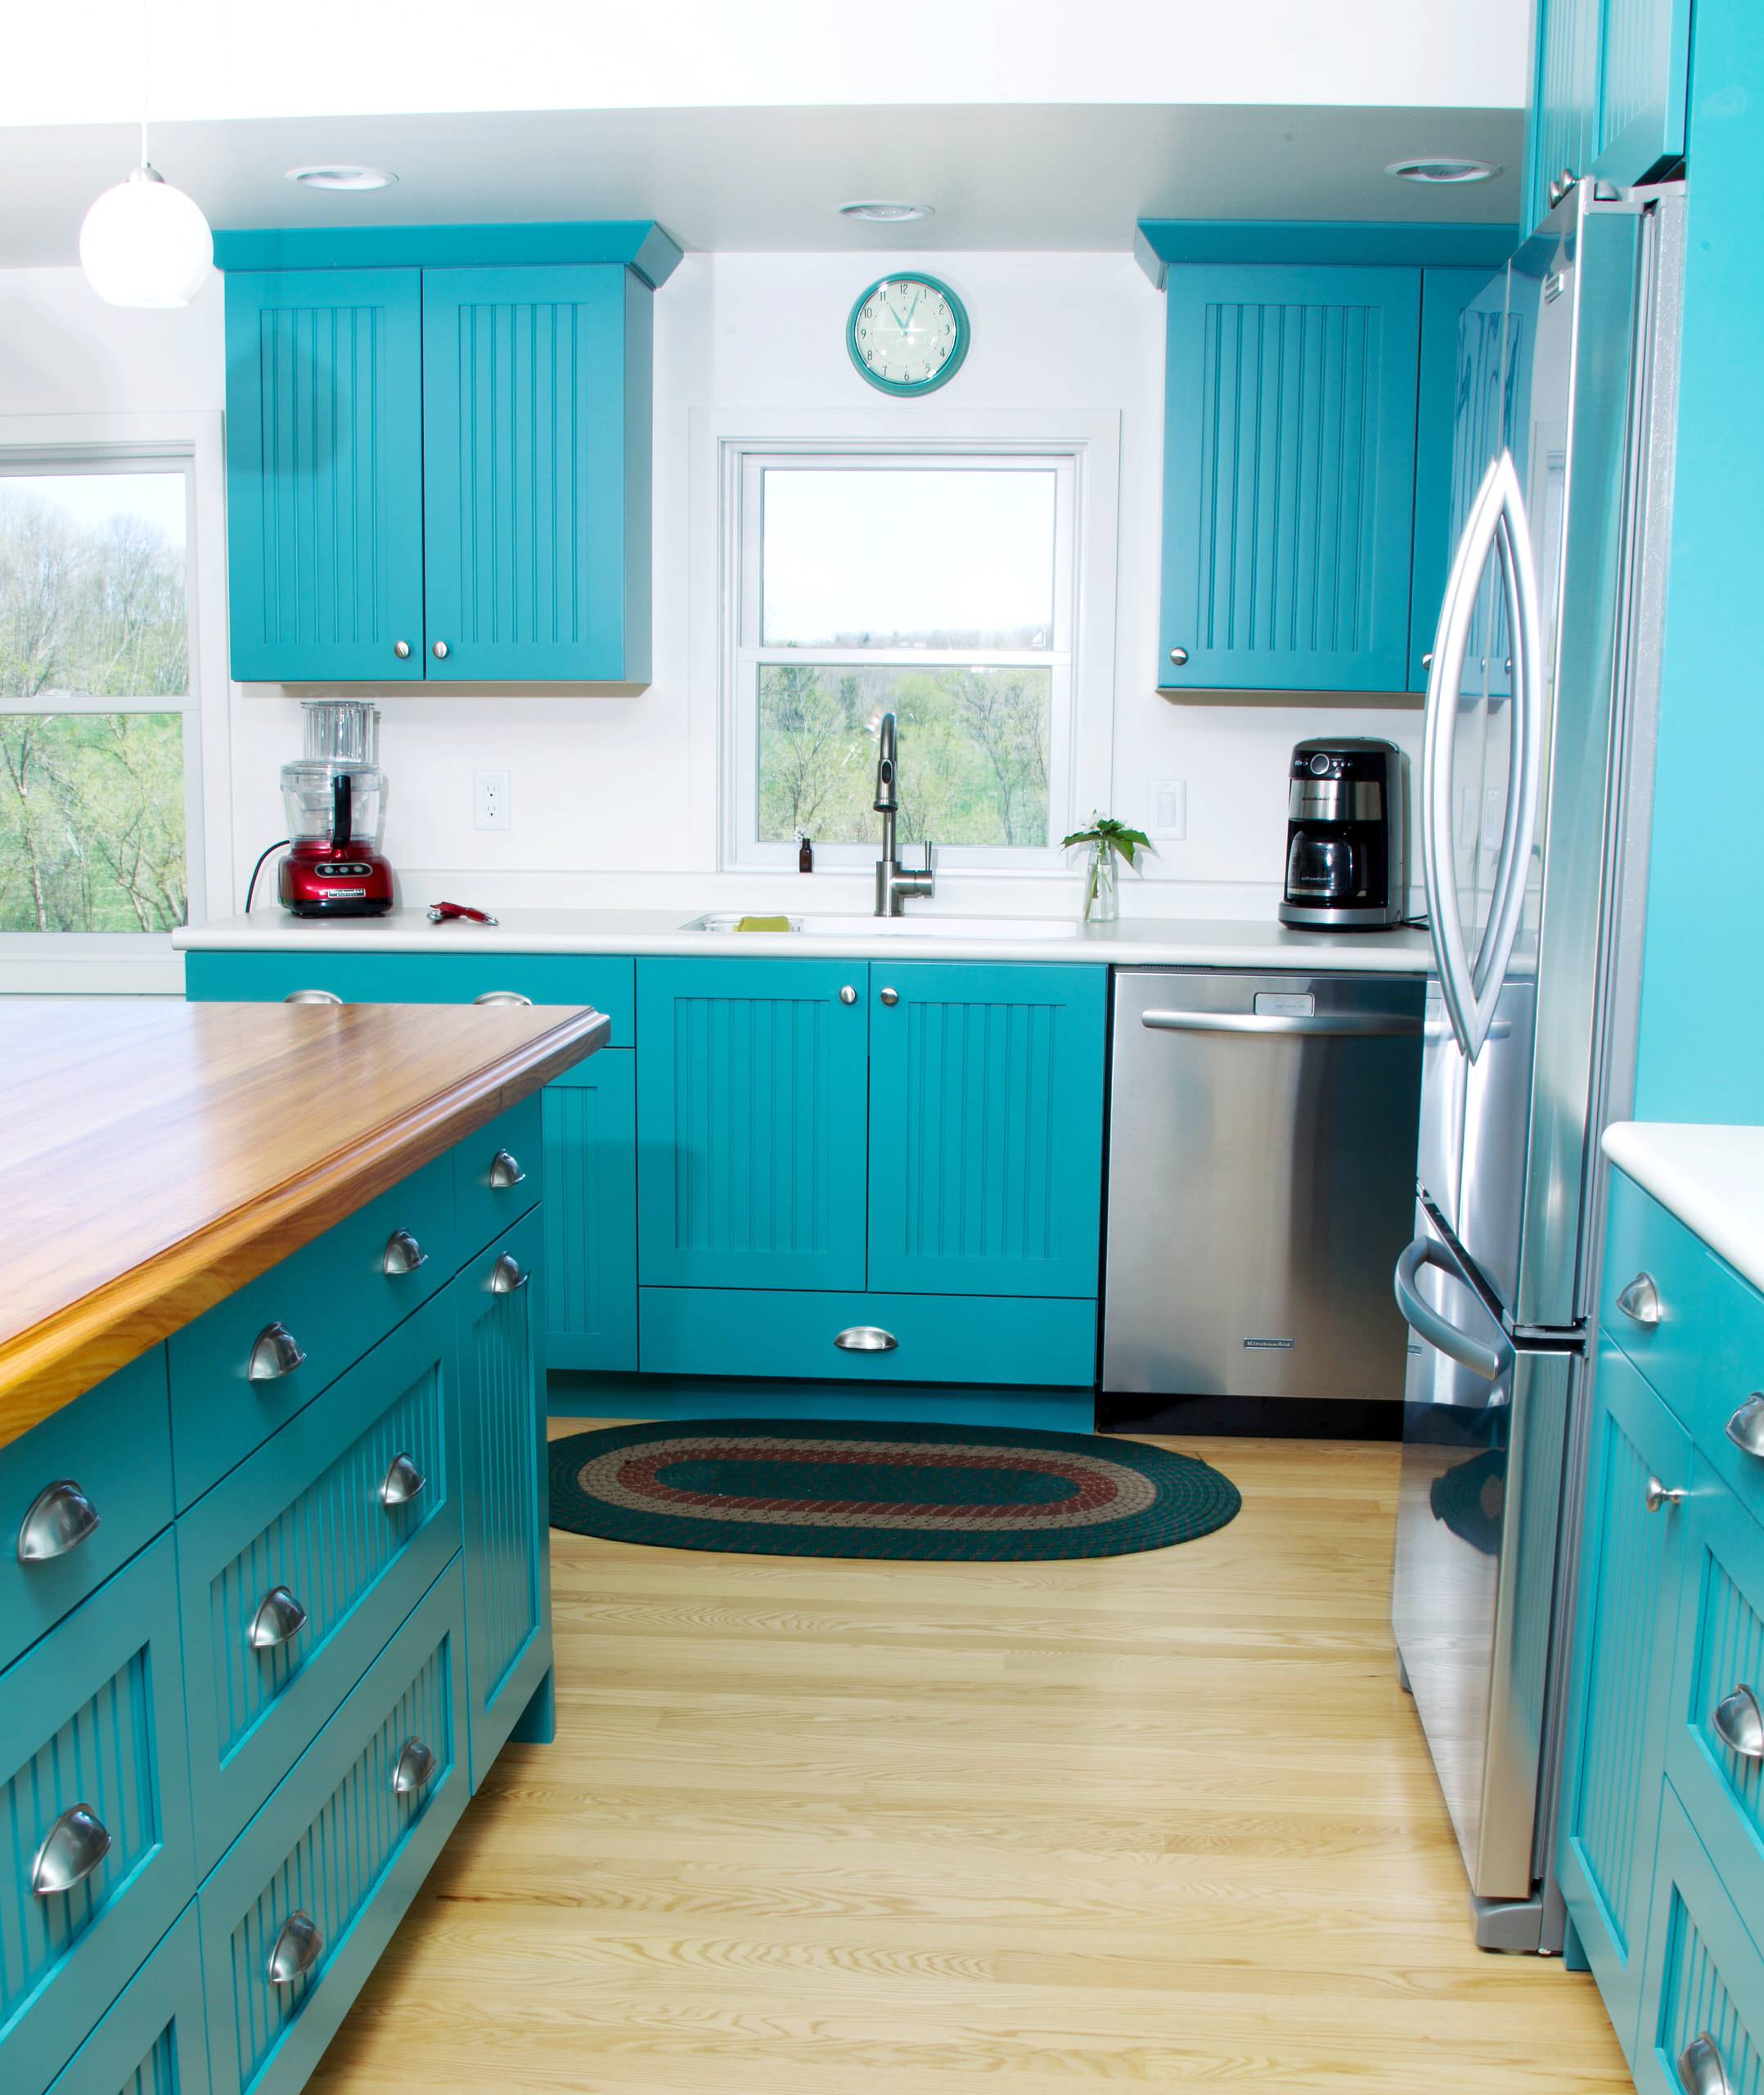 https://st.hzcdn.com/simgs/pictures/kitchens/bright-and-aqua-blue-cottage-styled-kitchen-remodel-dura-supreme-cabinetry-img~66912081010026f3_14-8071-1-f811c43.jpg